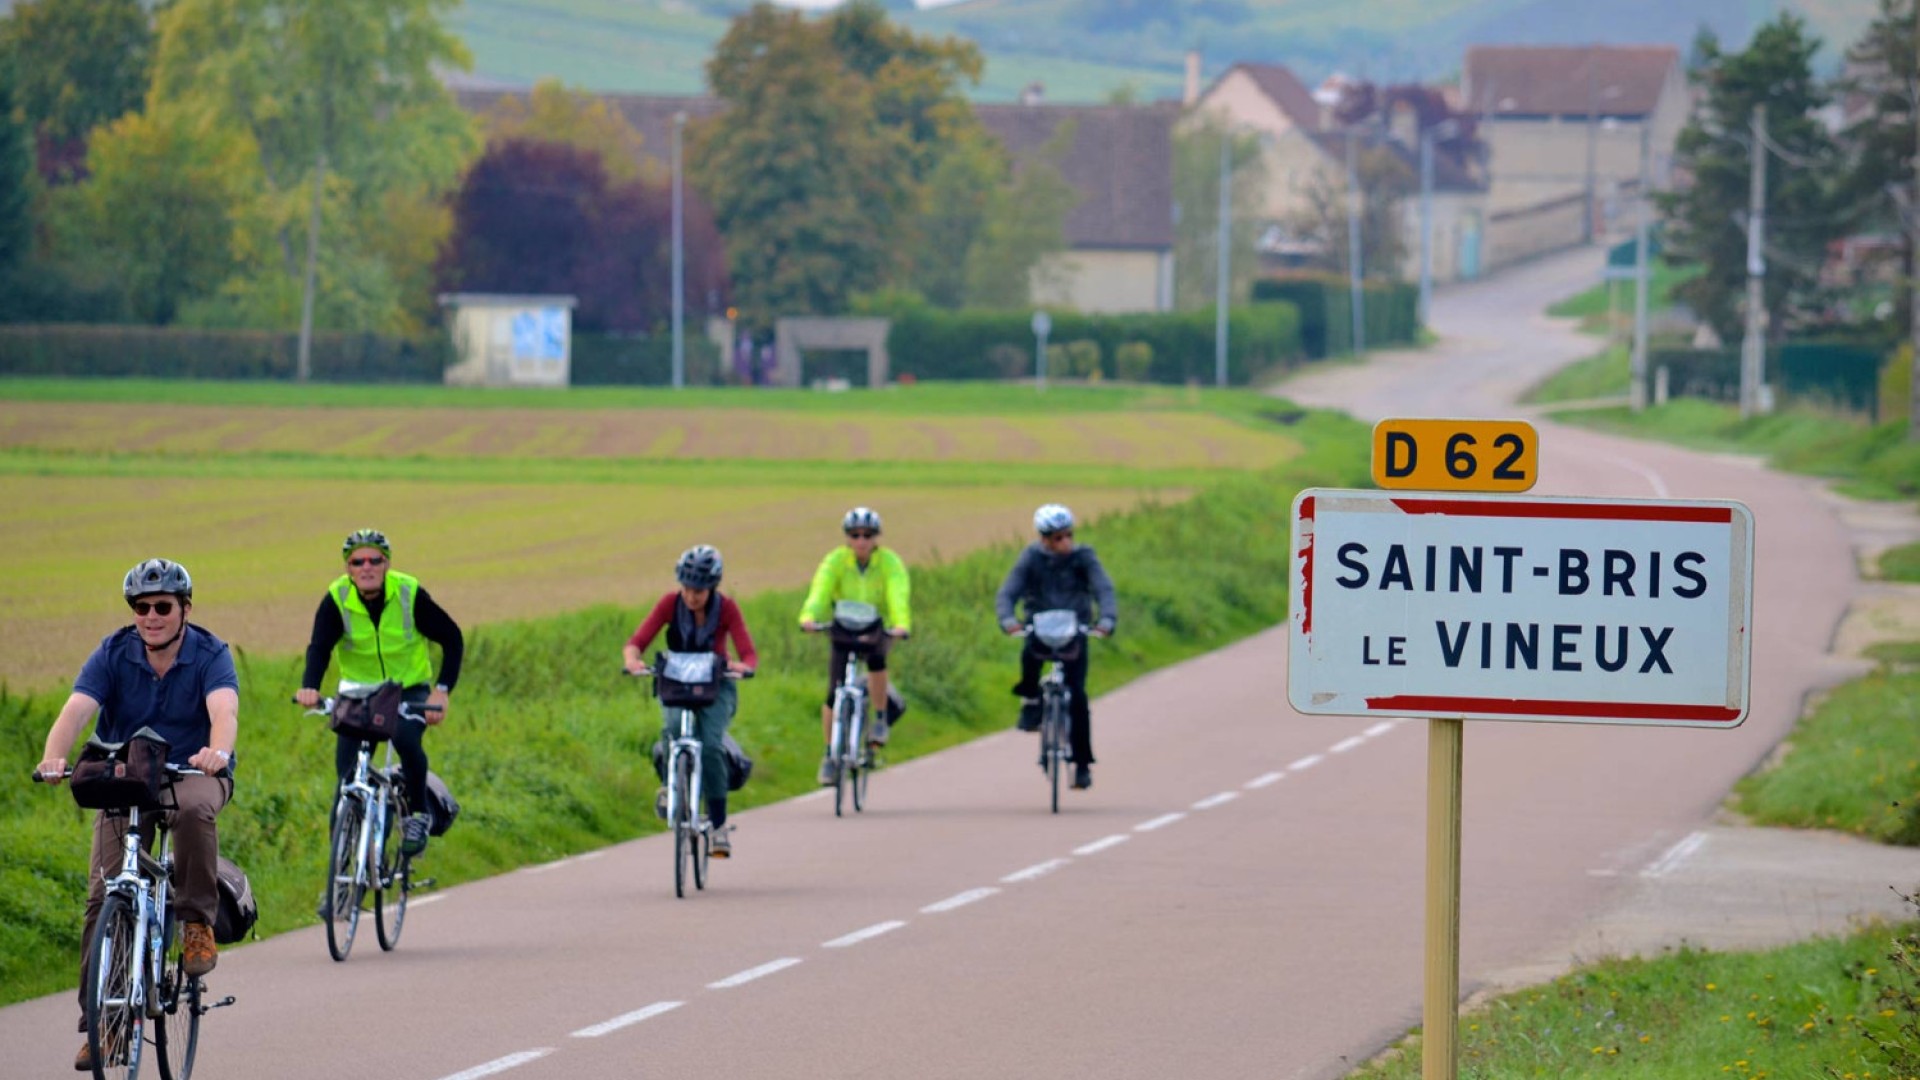 A group of bikers cycling towards the camera on a paved road in the French countryside